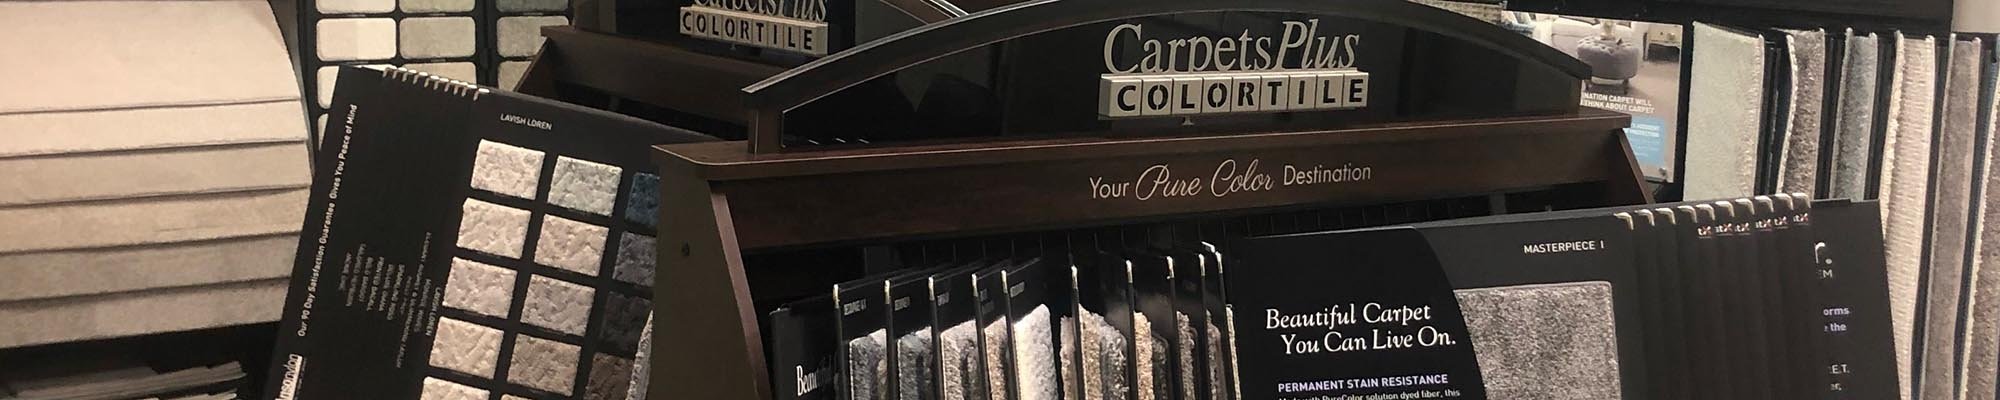 Local Flooring Retailer in Plianfield, IN - Floor Fashions CarpetsPlus COLORTILE providing a wide selection of flooring and expert advice.